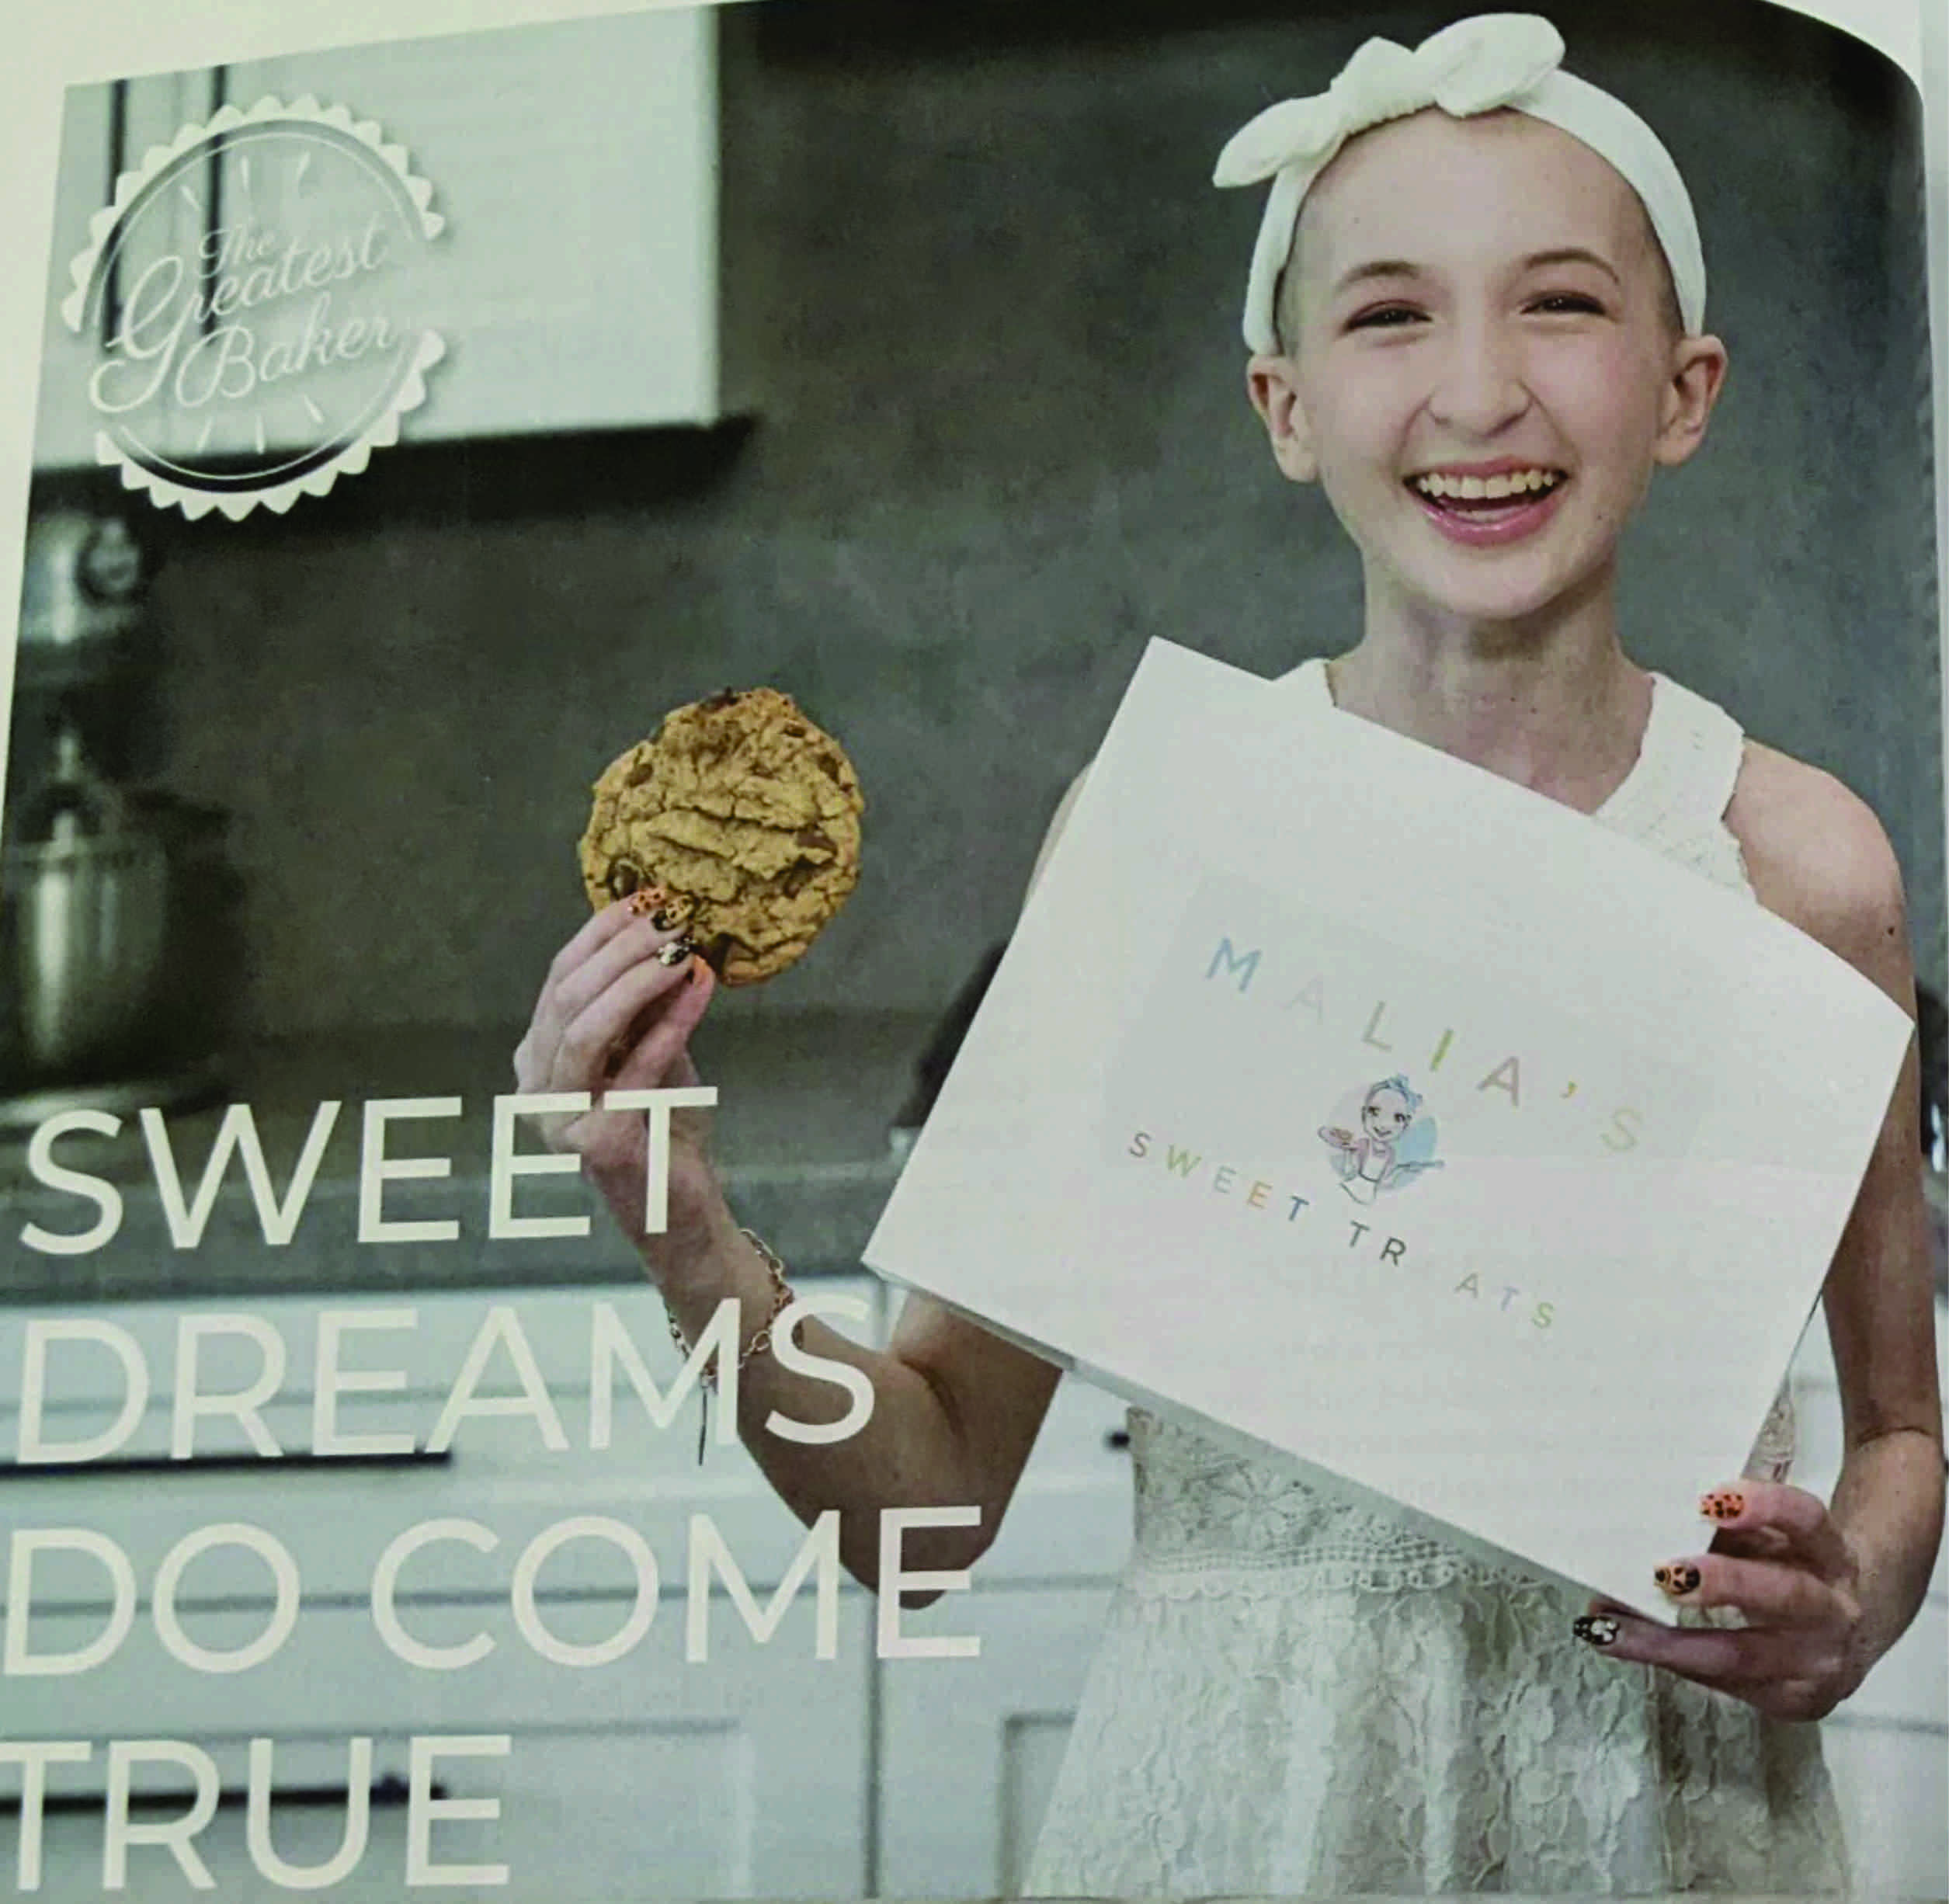 Pediatric Cancer Patient, Malia Jusczyk, is Winner of World-wide The Greatest Baker Contest